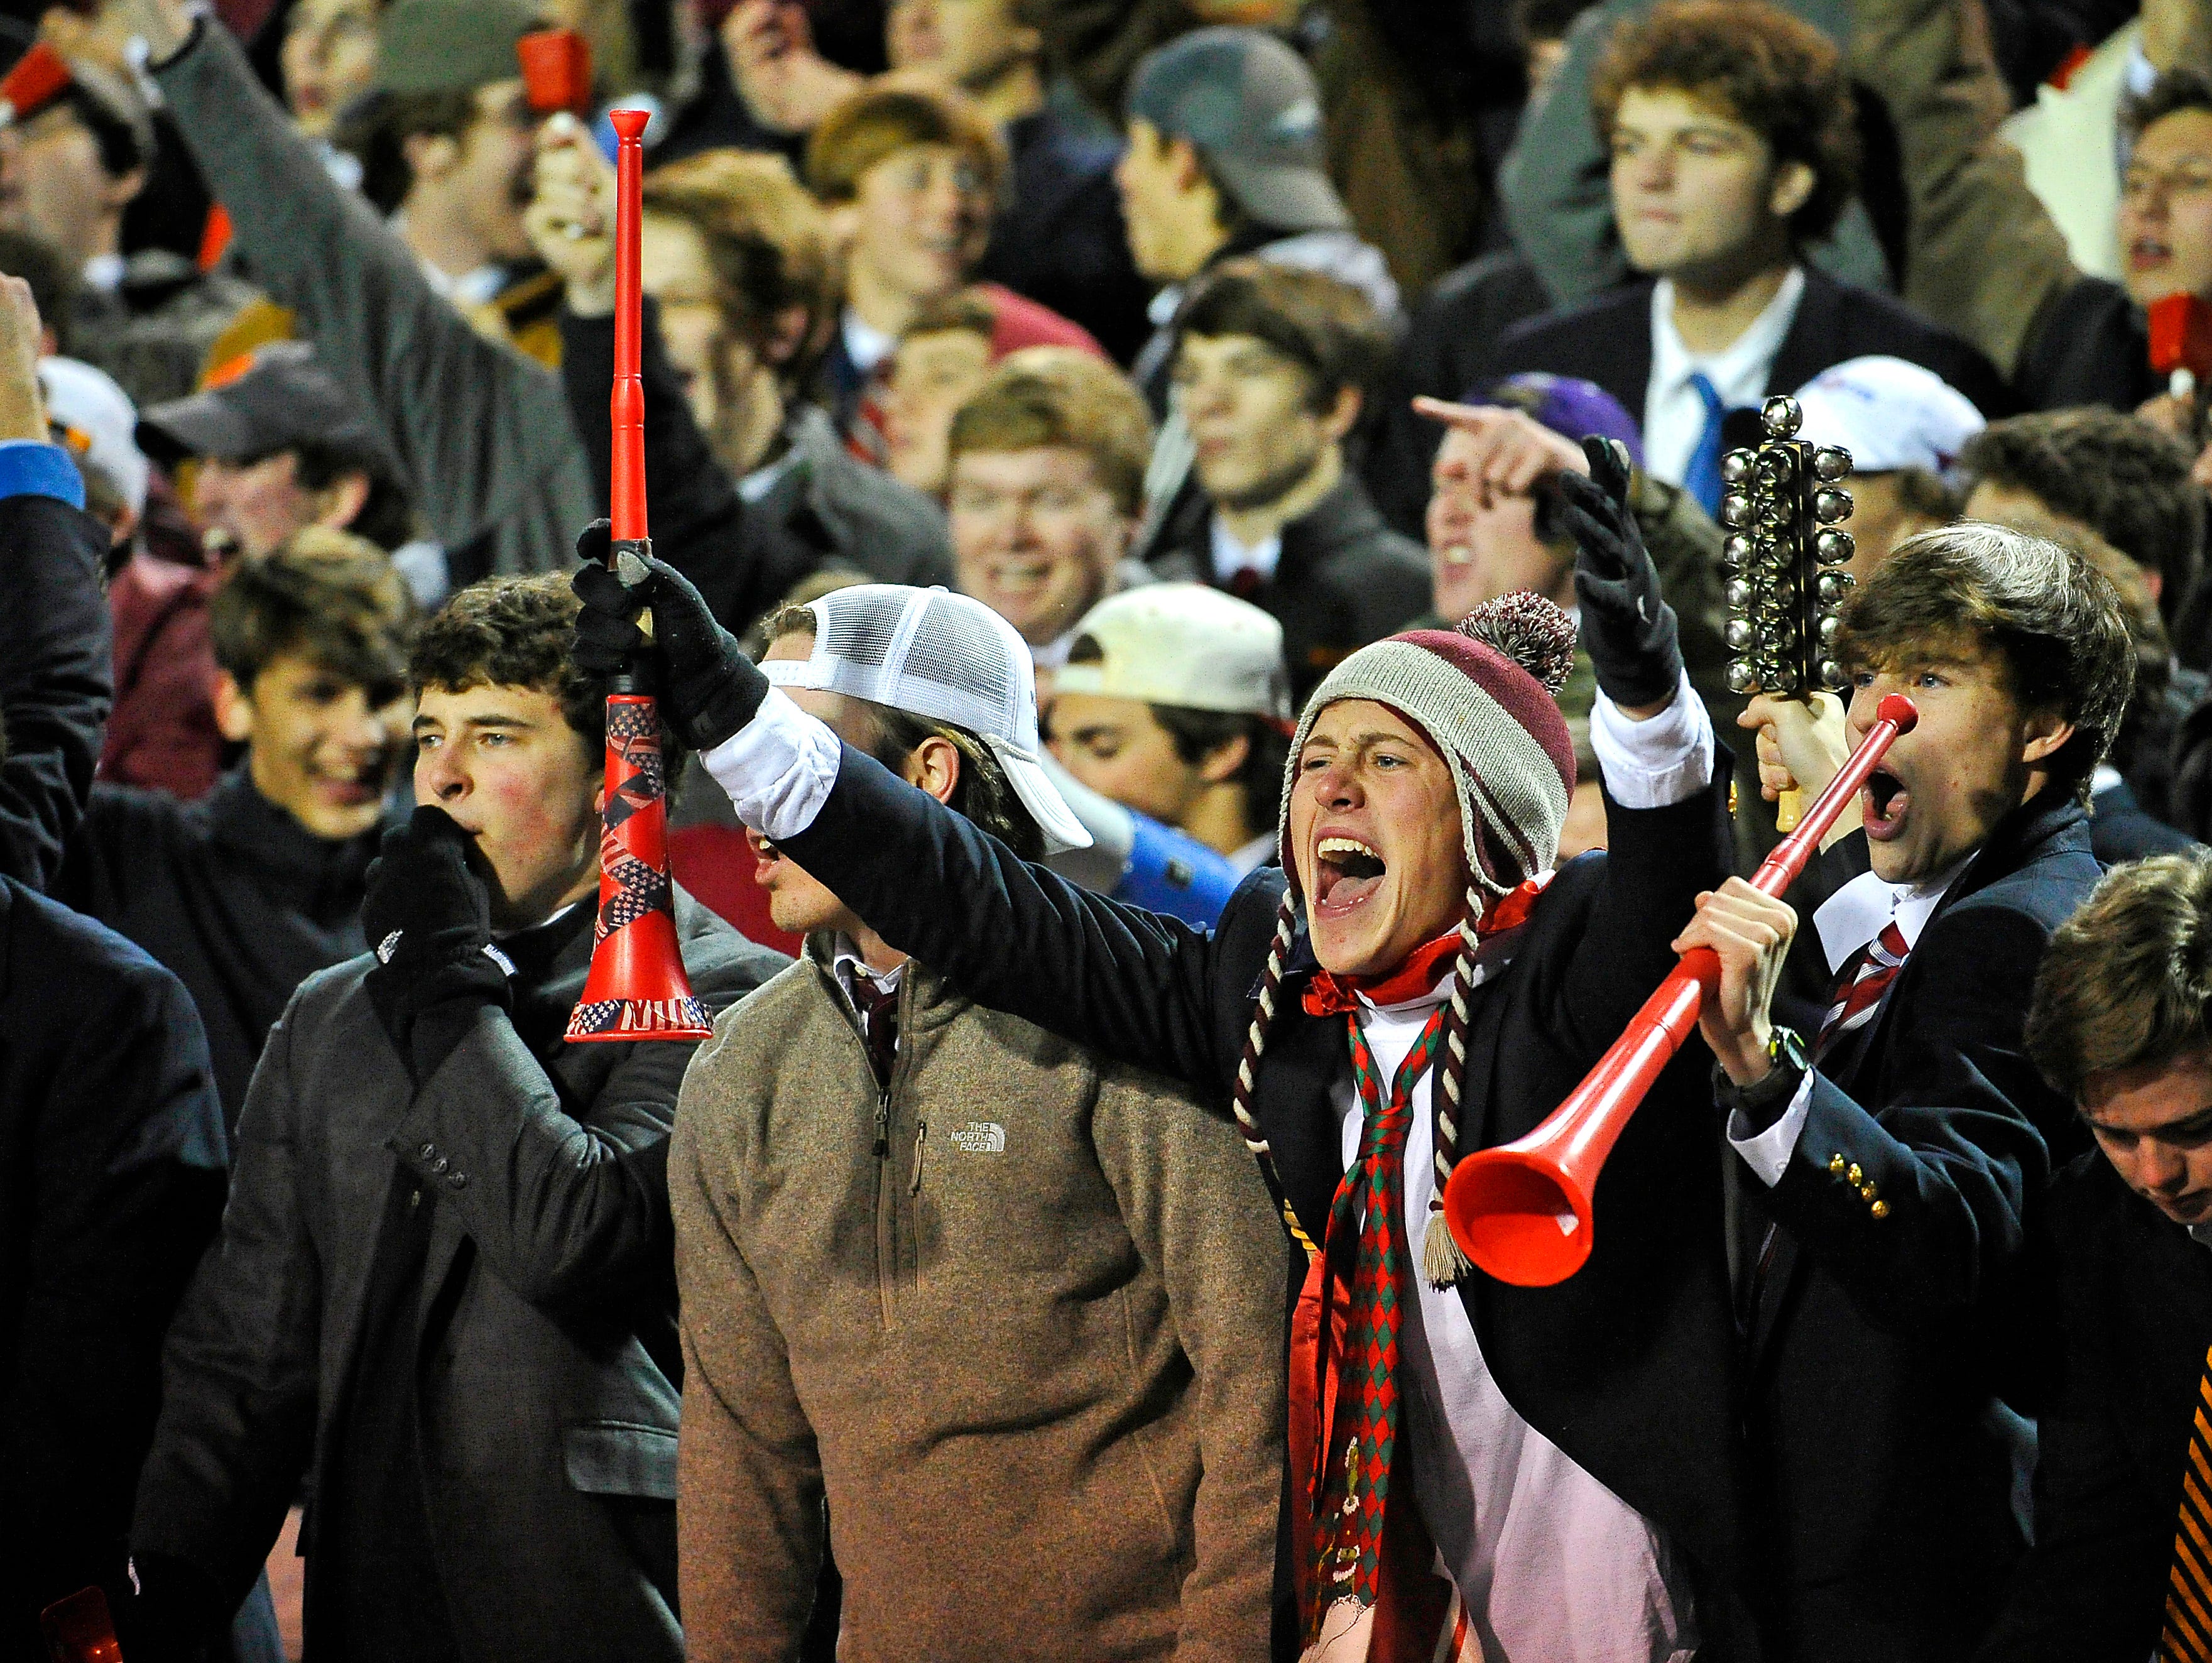 Montgomery Bell Academy fans cheer on their team as they play in the BlueCross Bowl DII-AA state title game on Dec. 3, 2015, in Cookeville.